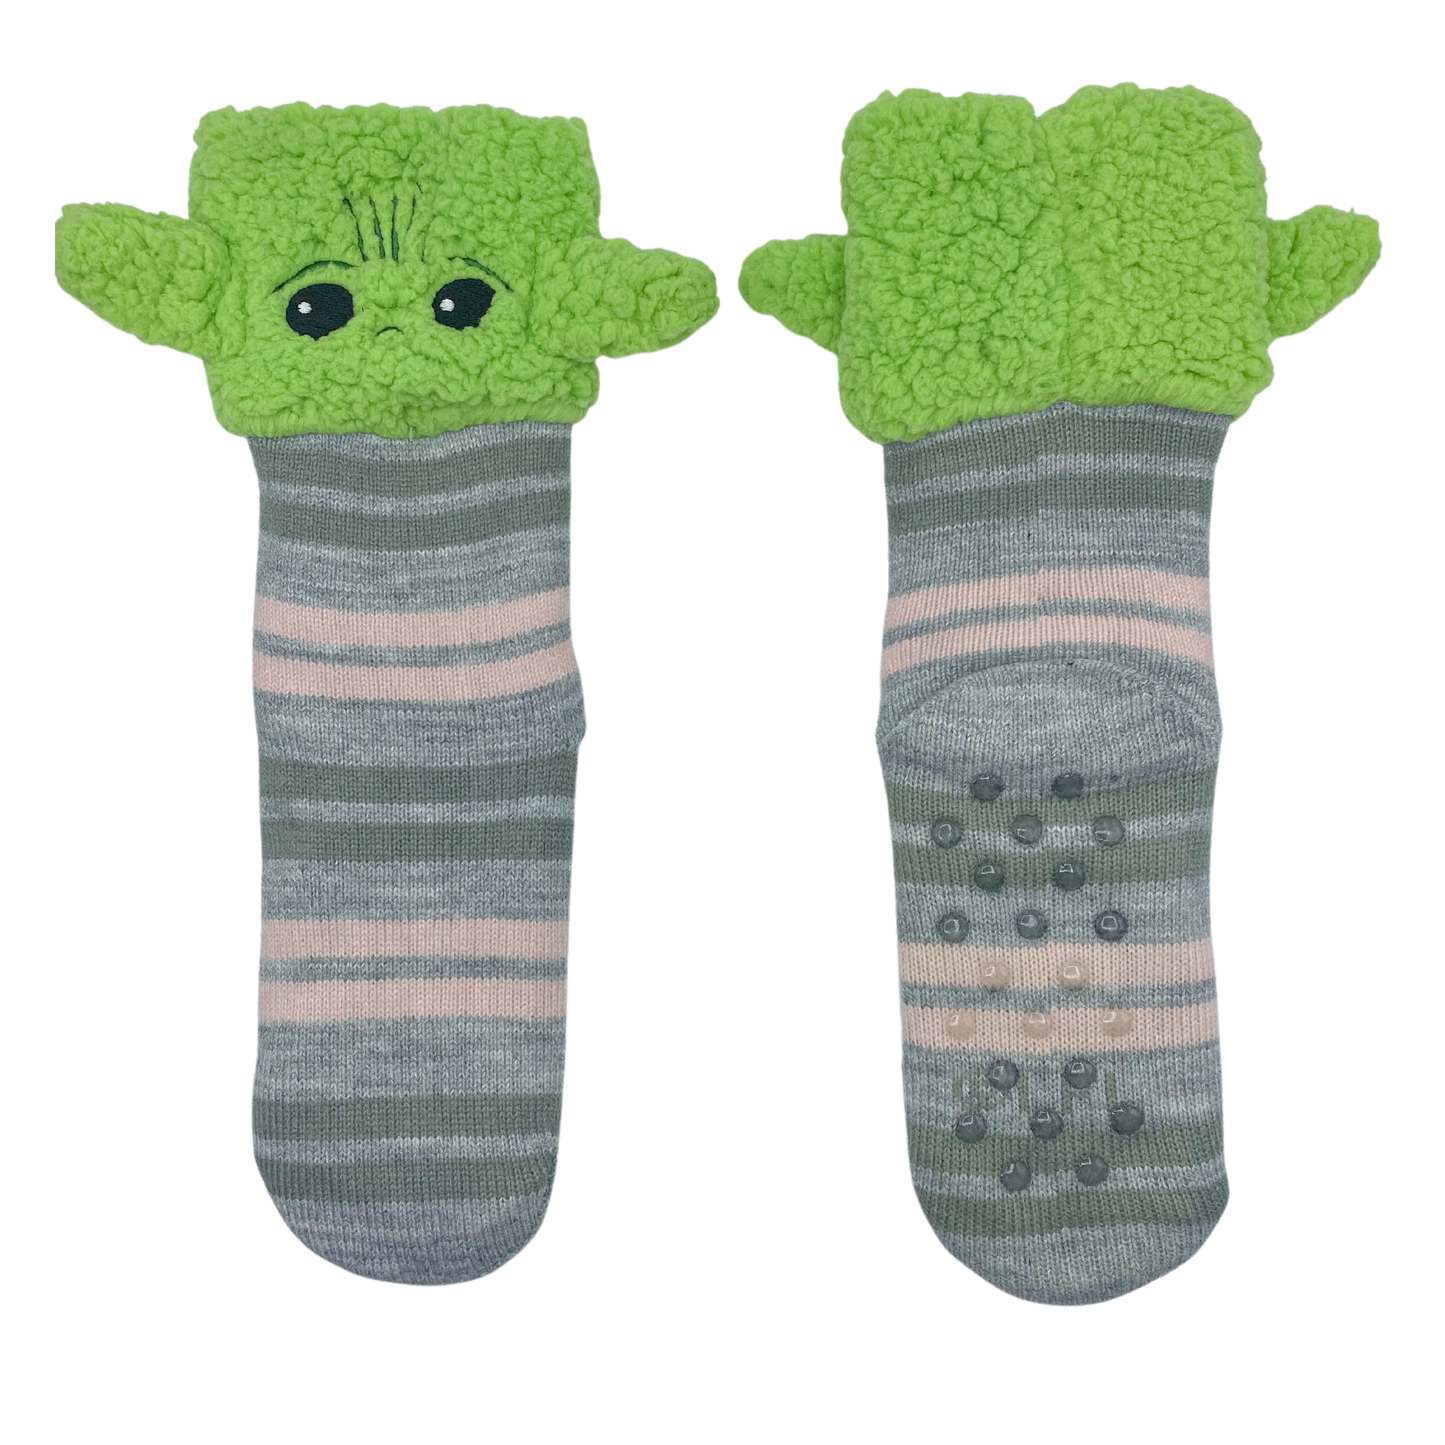 One light grey slipper sock with alternating thick dark grey and pink stripes spaced out featuring a green fuzzy Grogu face with pointy green ears.